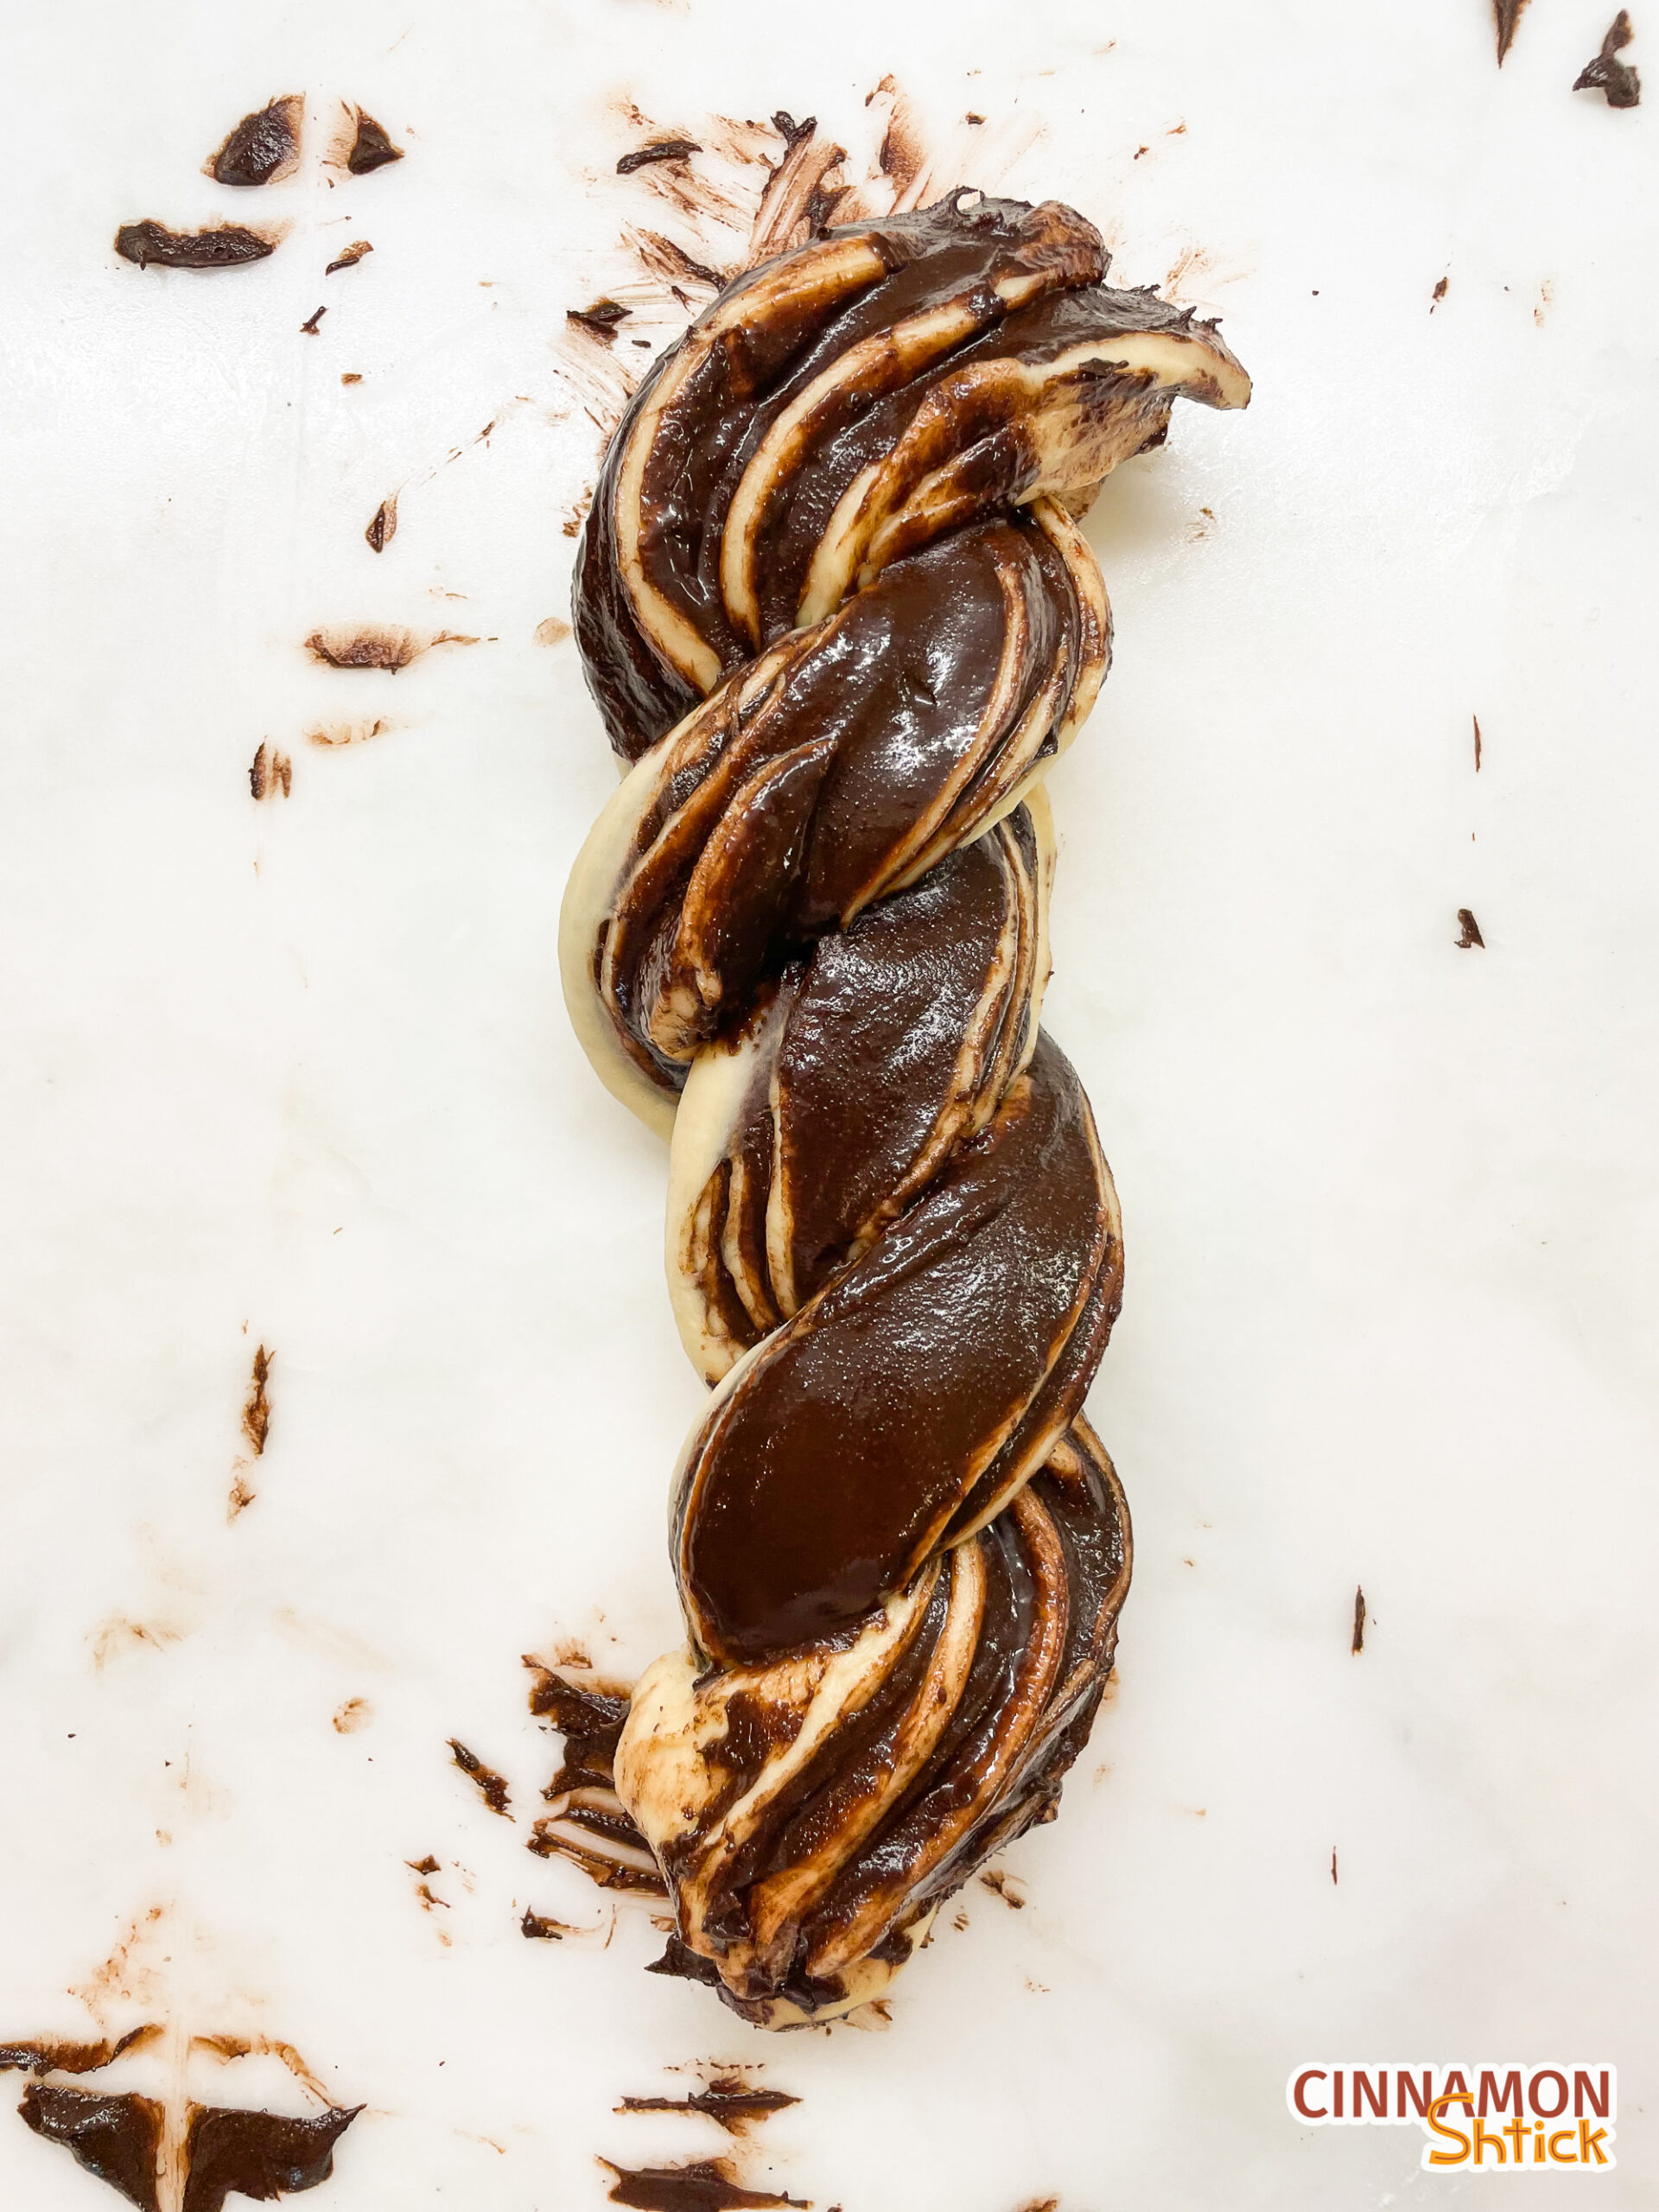 babka dough sliced and twisted showing the chocolate filling